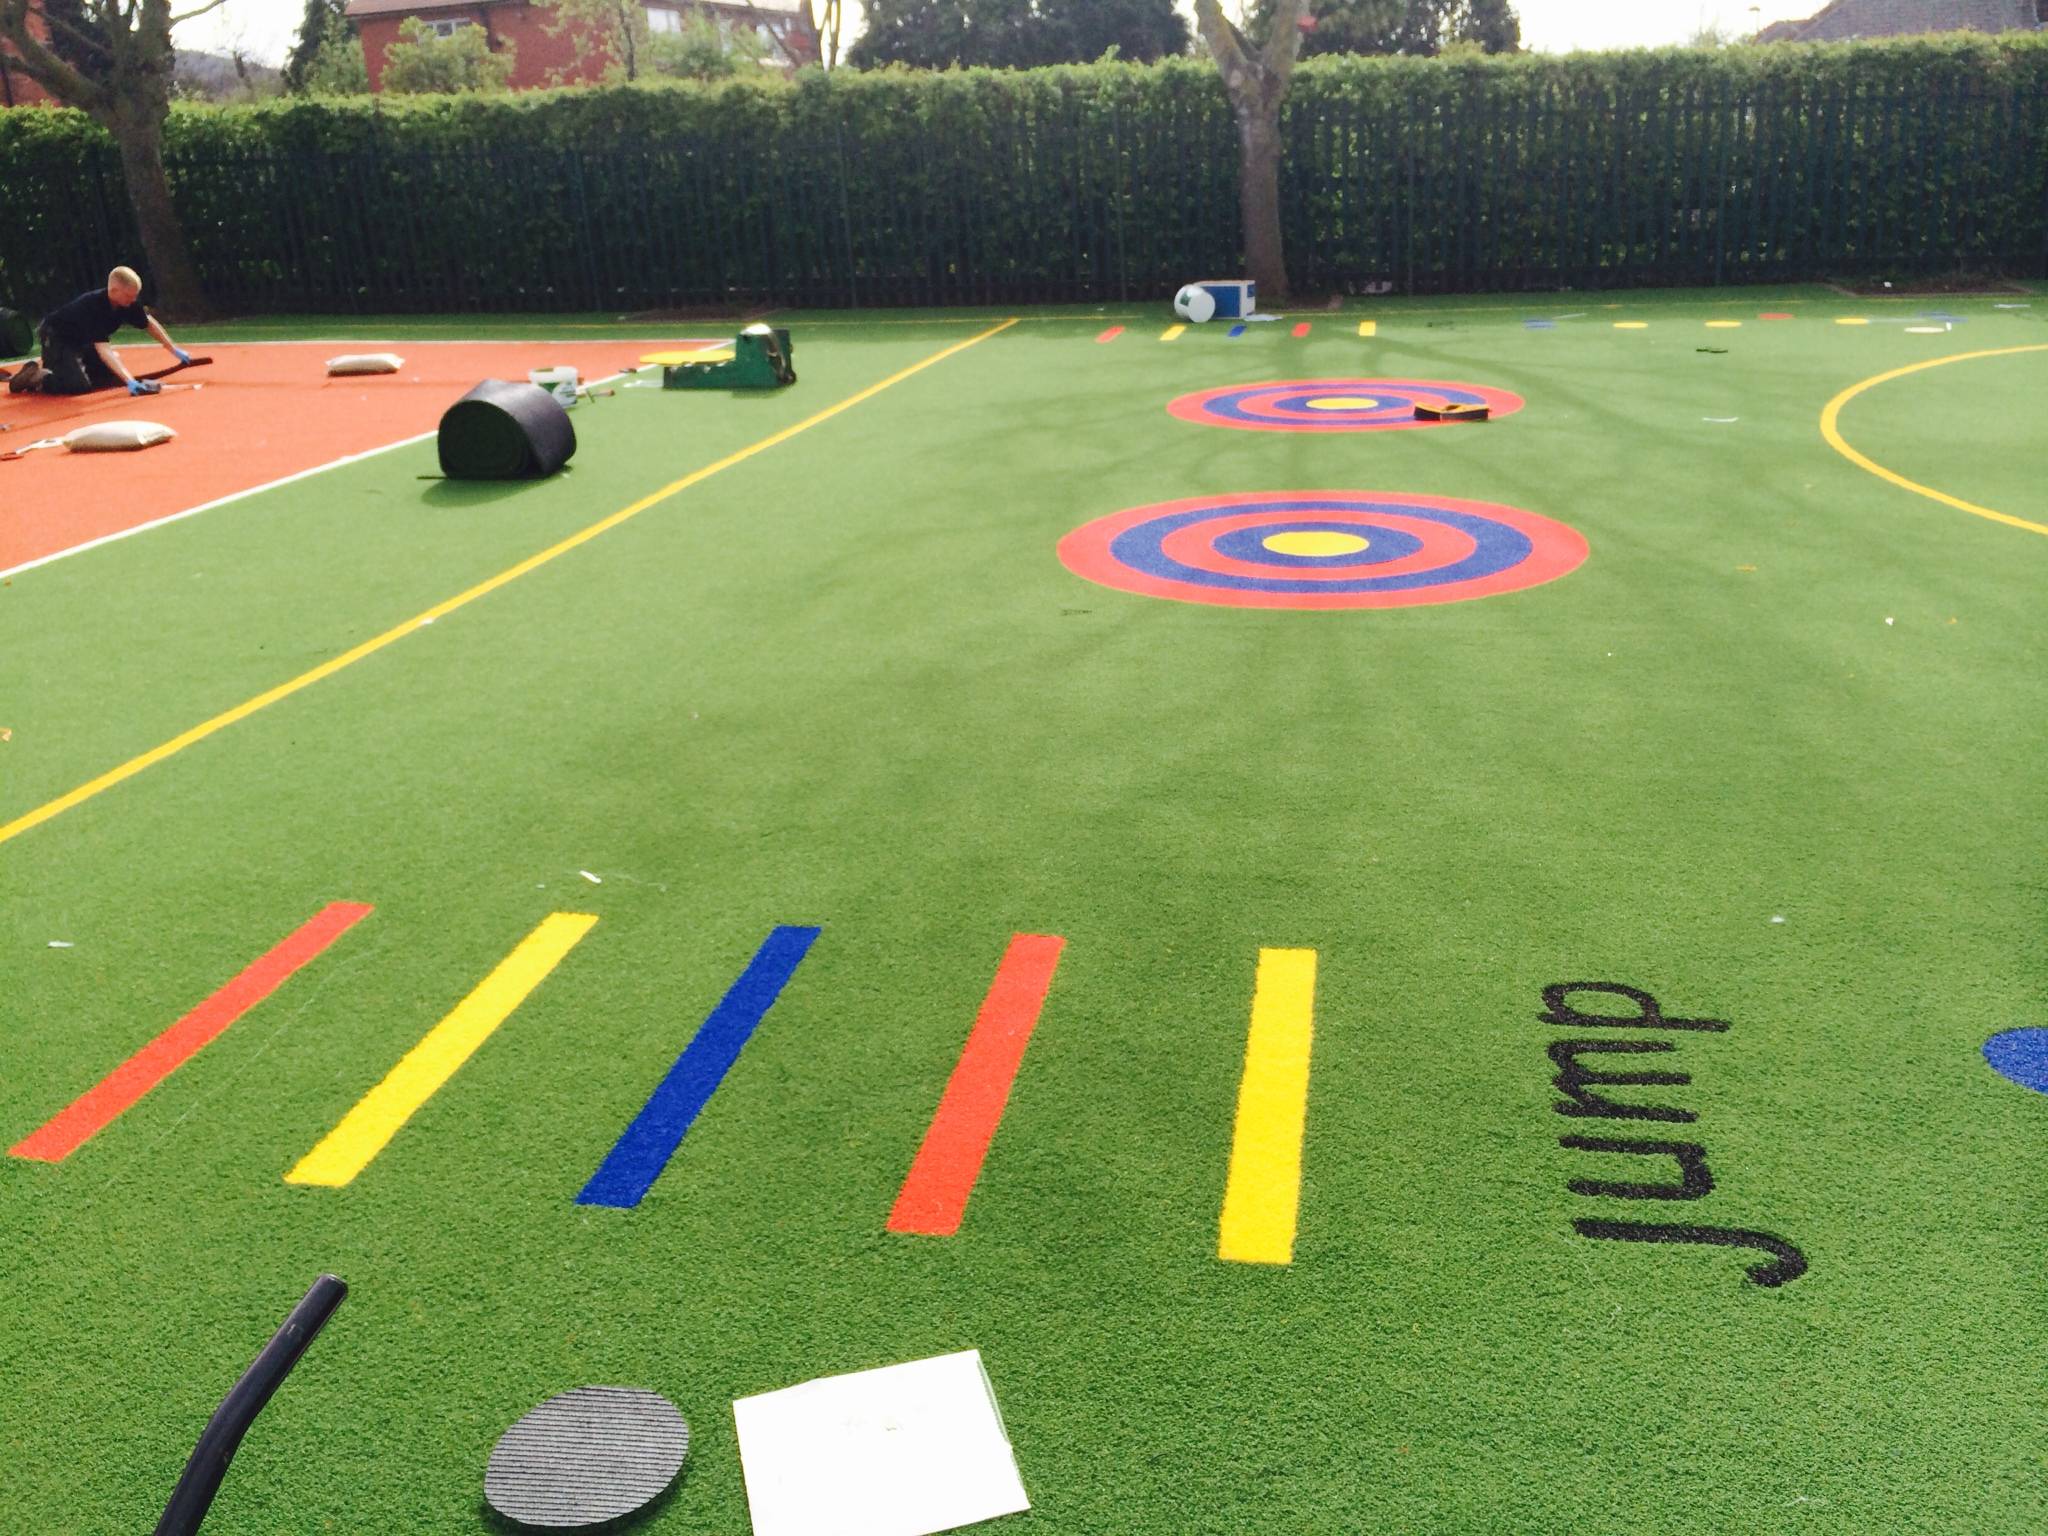 Wilton Primary School: STM Artificial grass for schools: EPIC playground surface with jump line